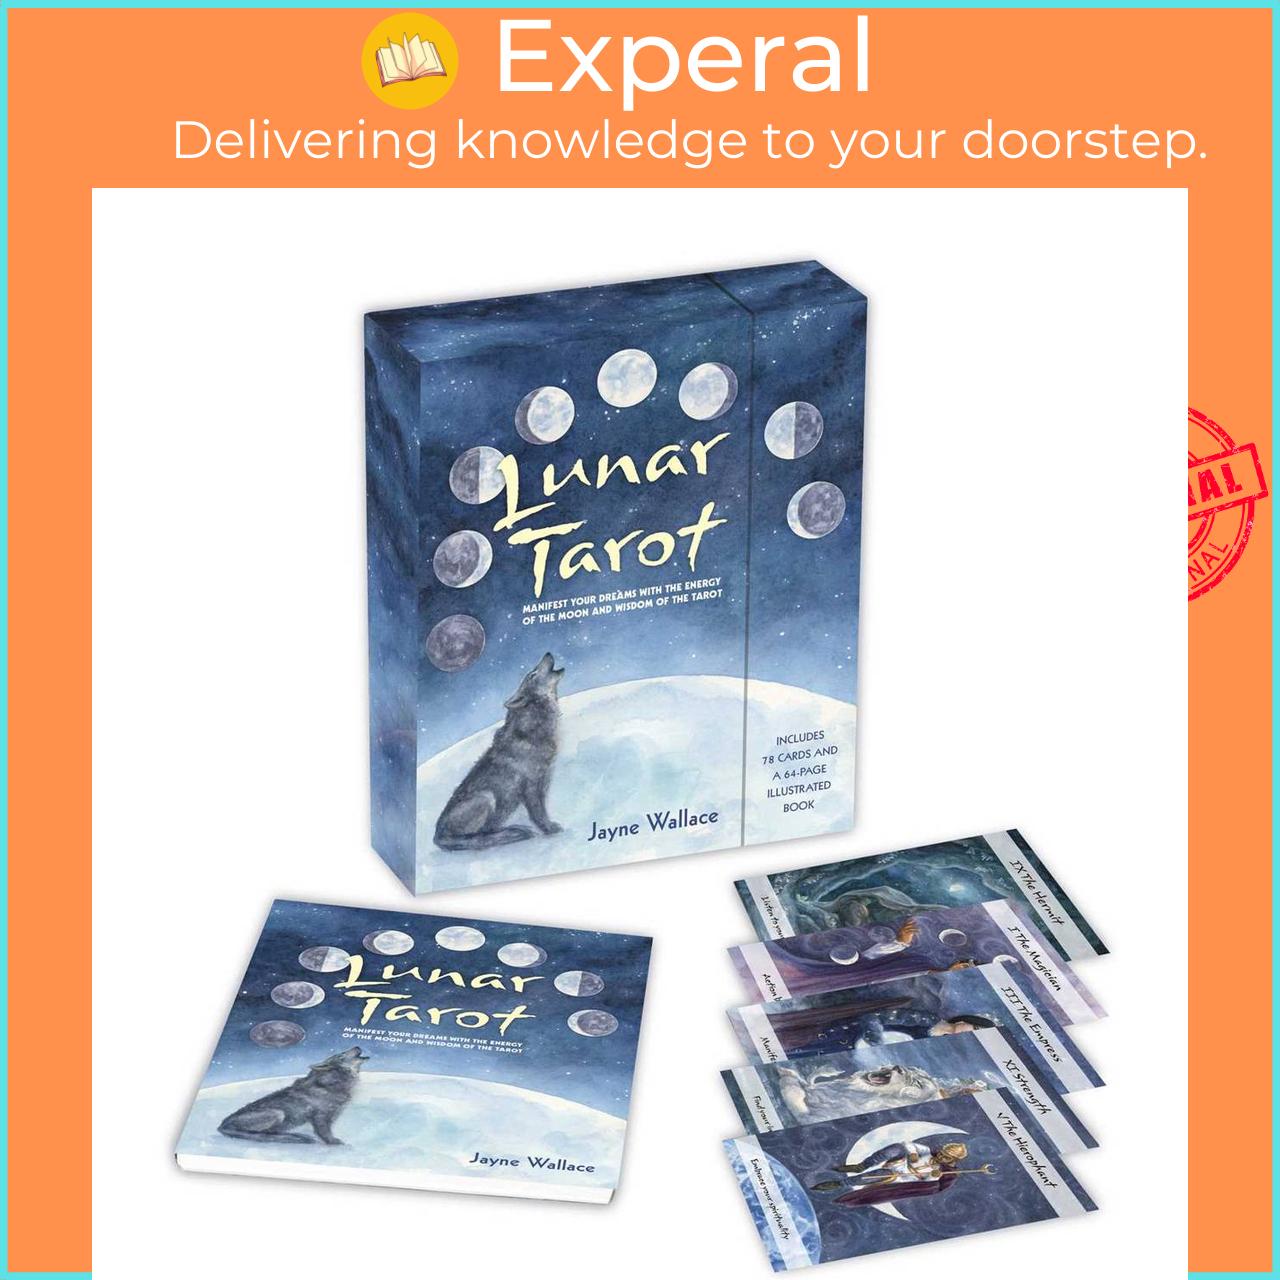 Sách - Lunar Tarot - Manifest your dreams with the energy of the moon and wisdo by Jayne Wallace (US edition, paperback)